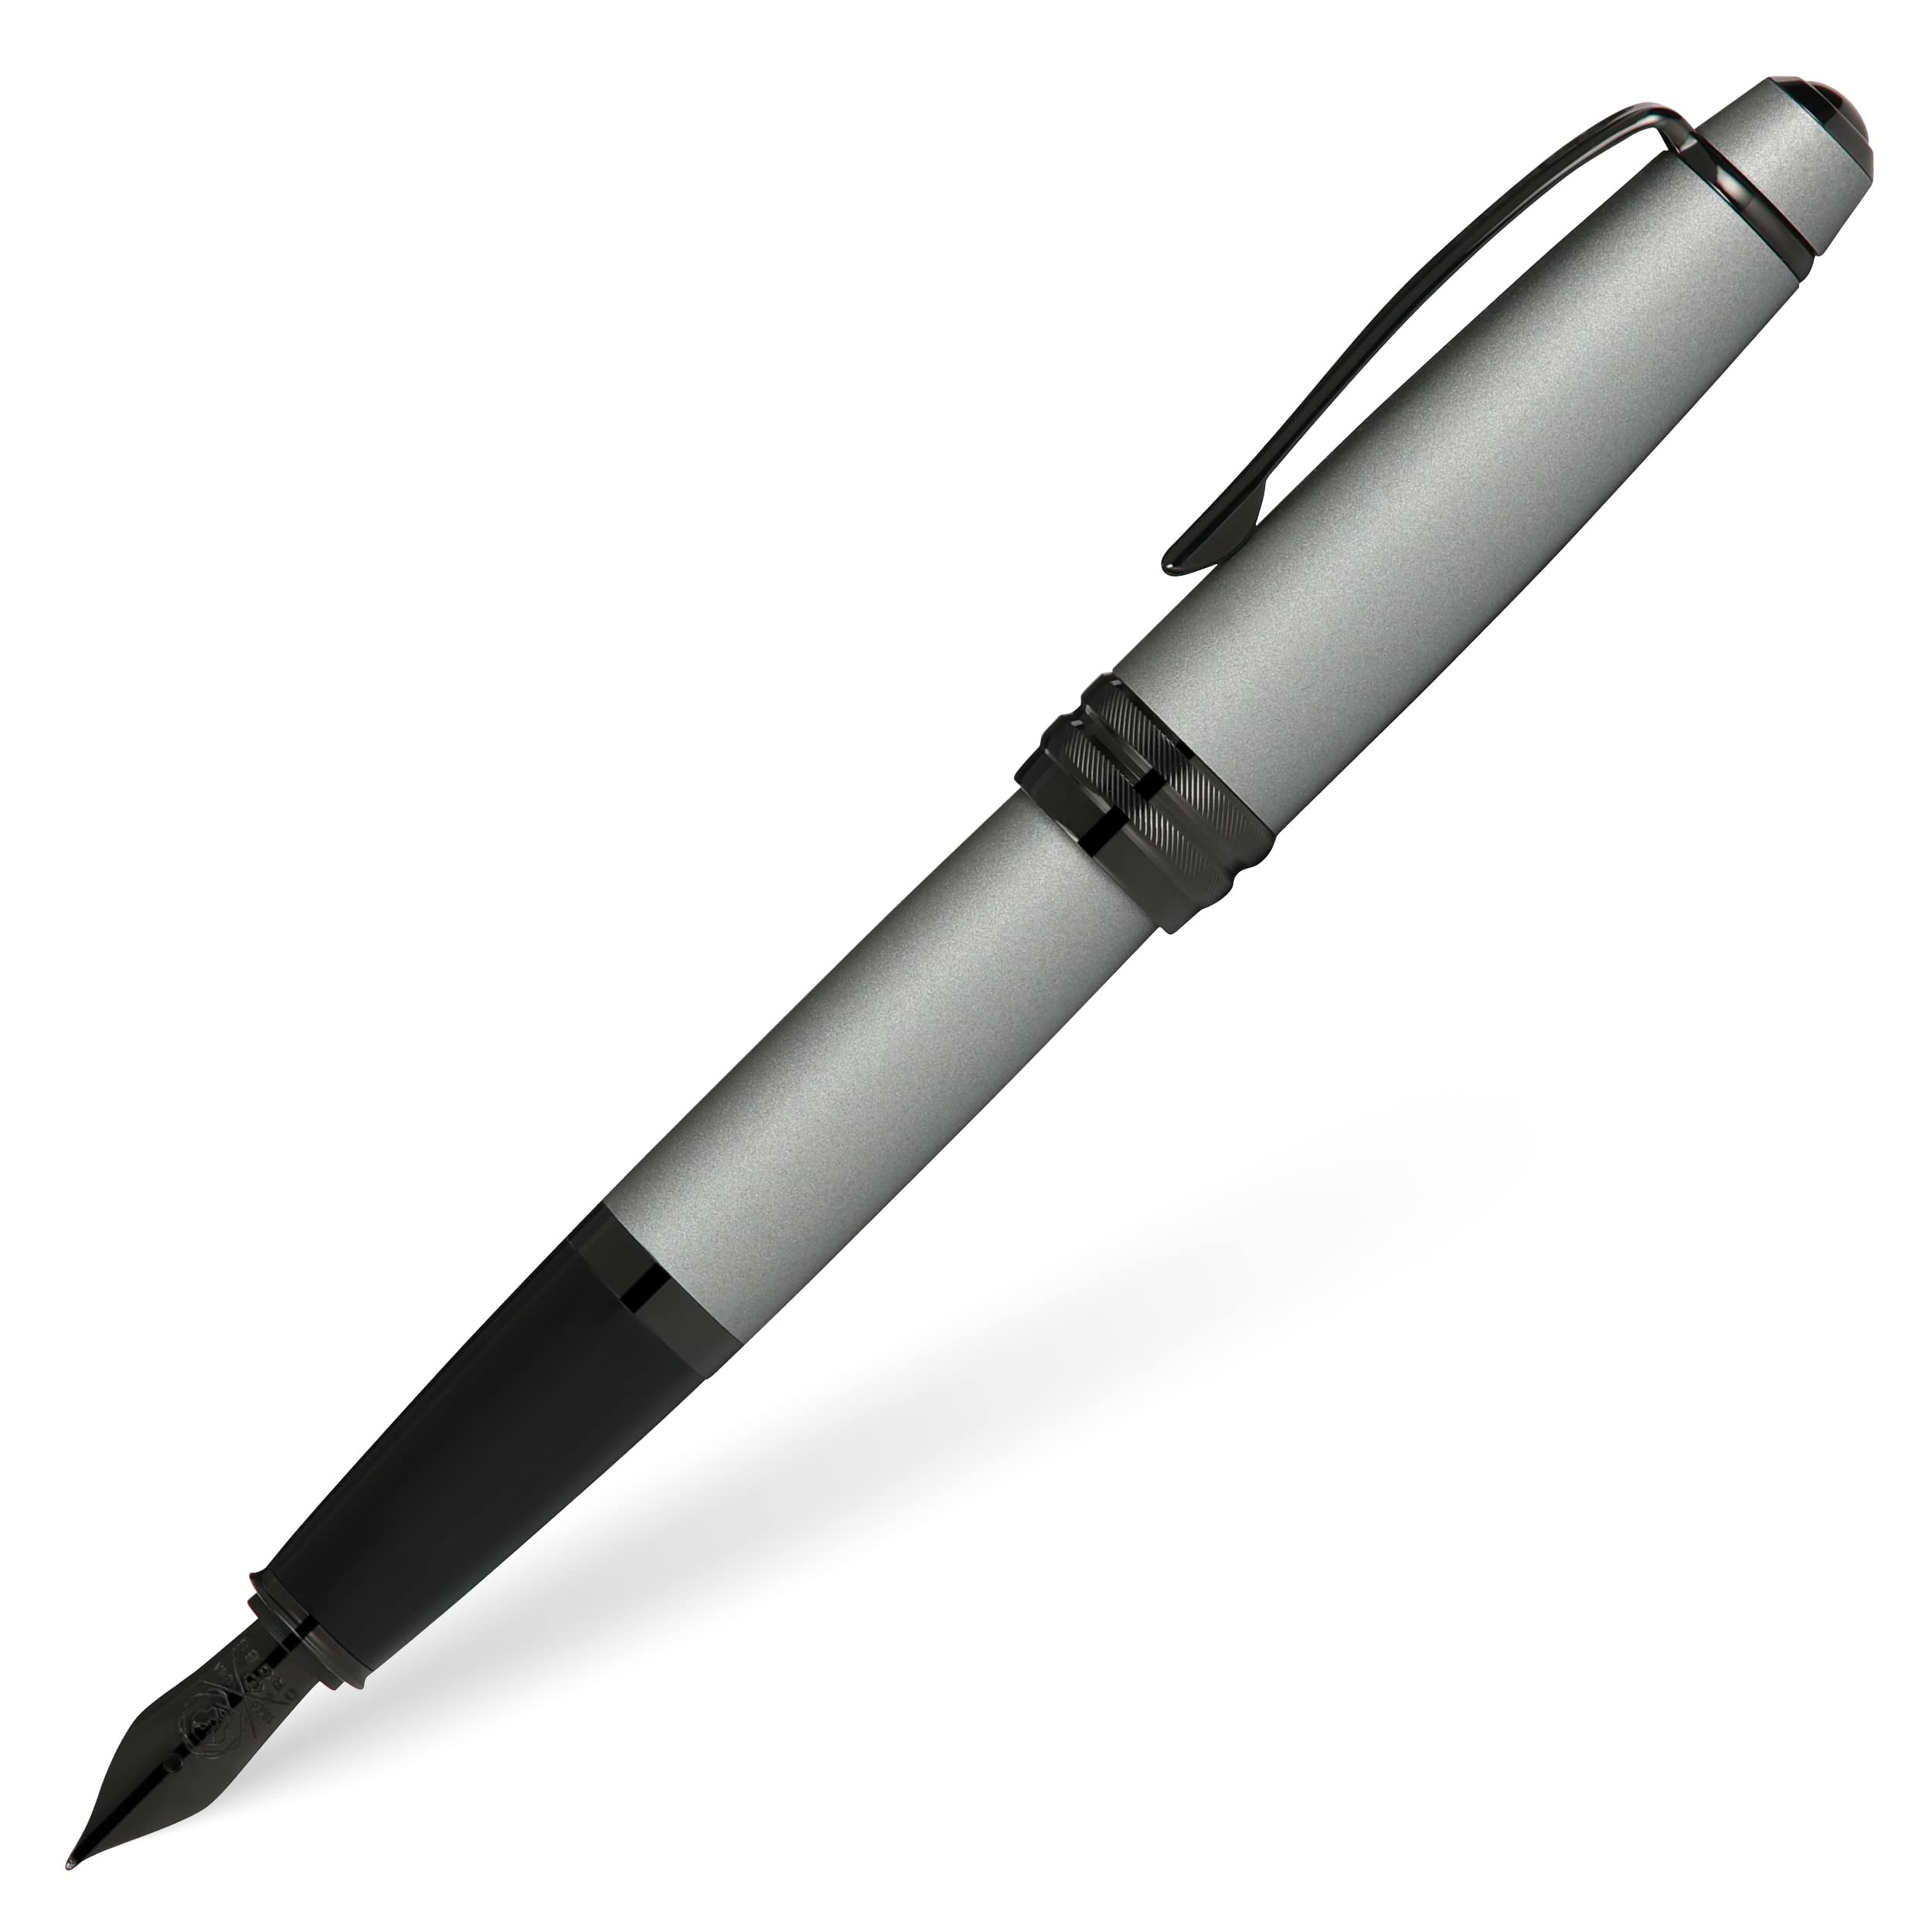 Cross Bailey Matte Grey Lacquer Fountain Pen With Polished Black Pvd Appointments, Medium Nib